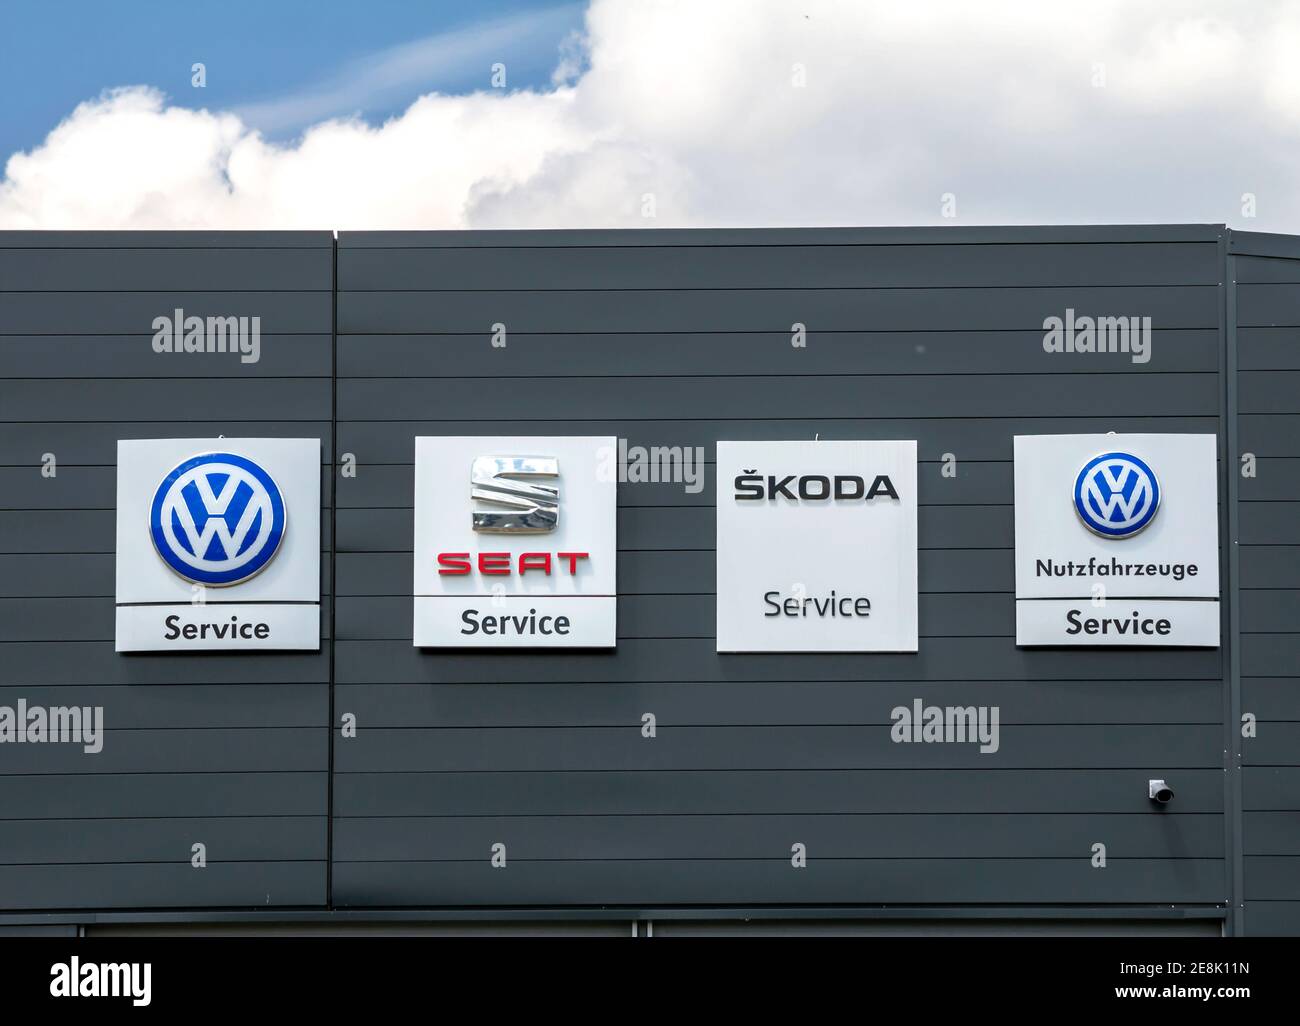 group dealership and service, Skoda, Seat and . The Group is the second-largest automaker in the world. Stock Photo